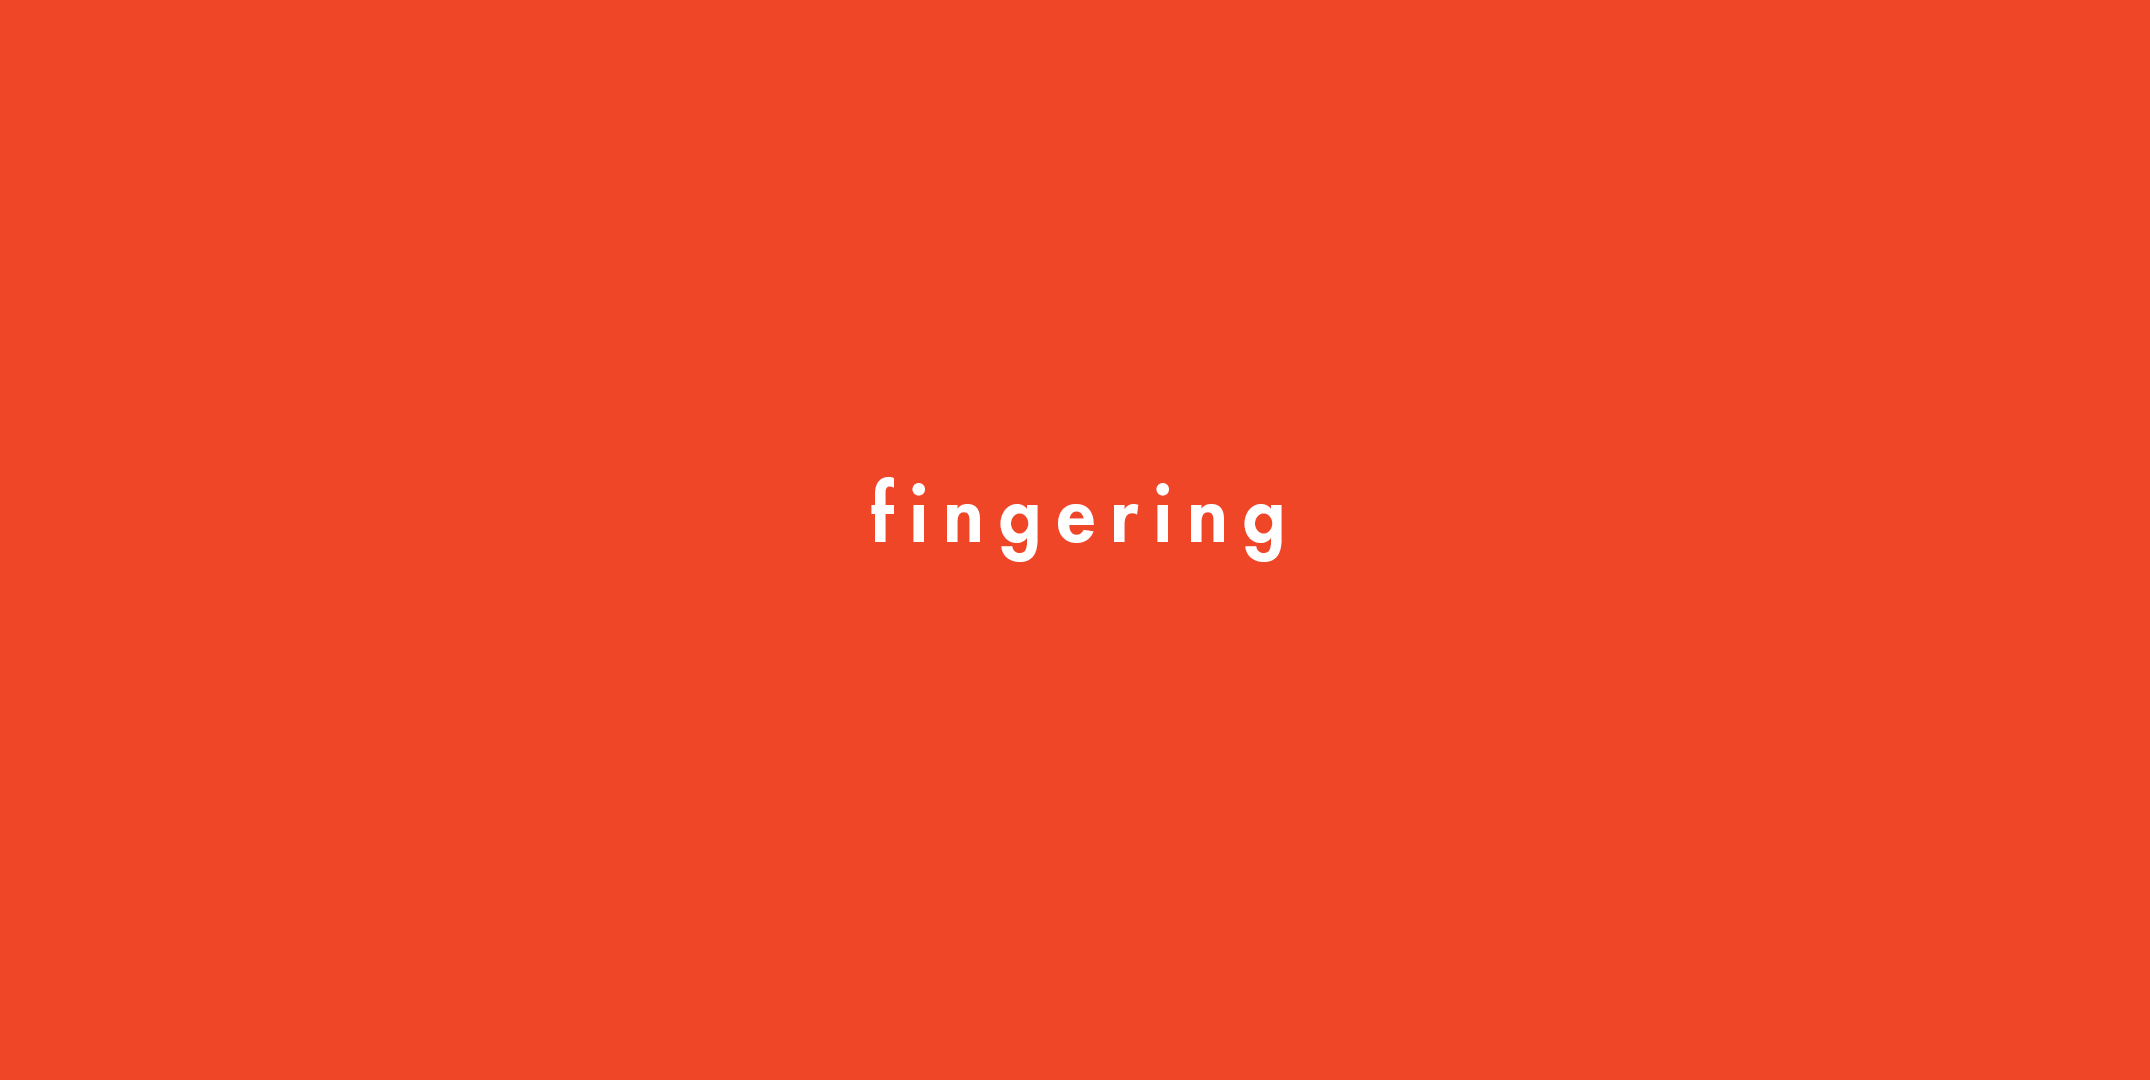 What Does Fingering Mean pic